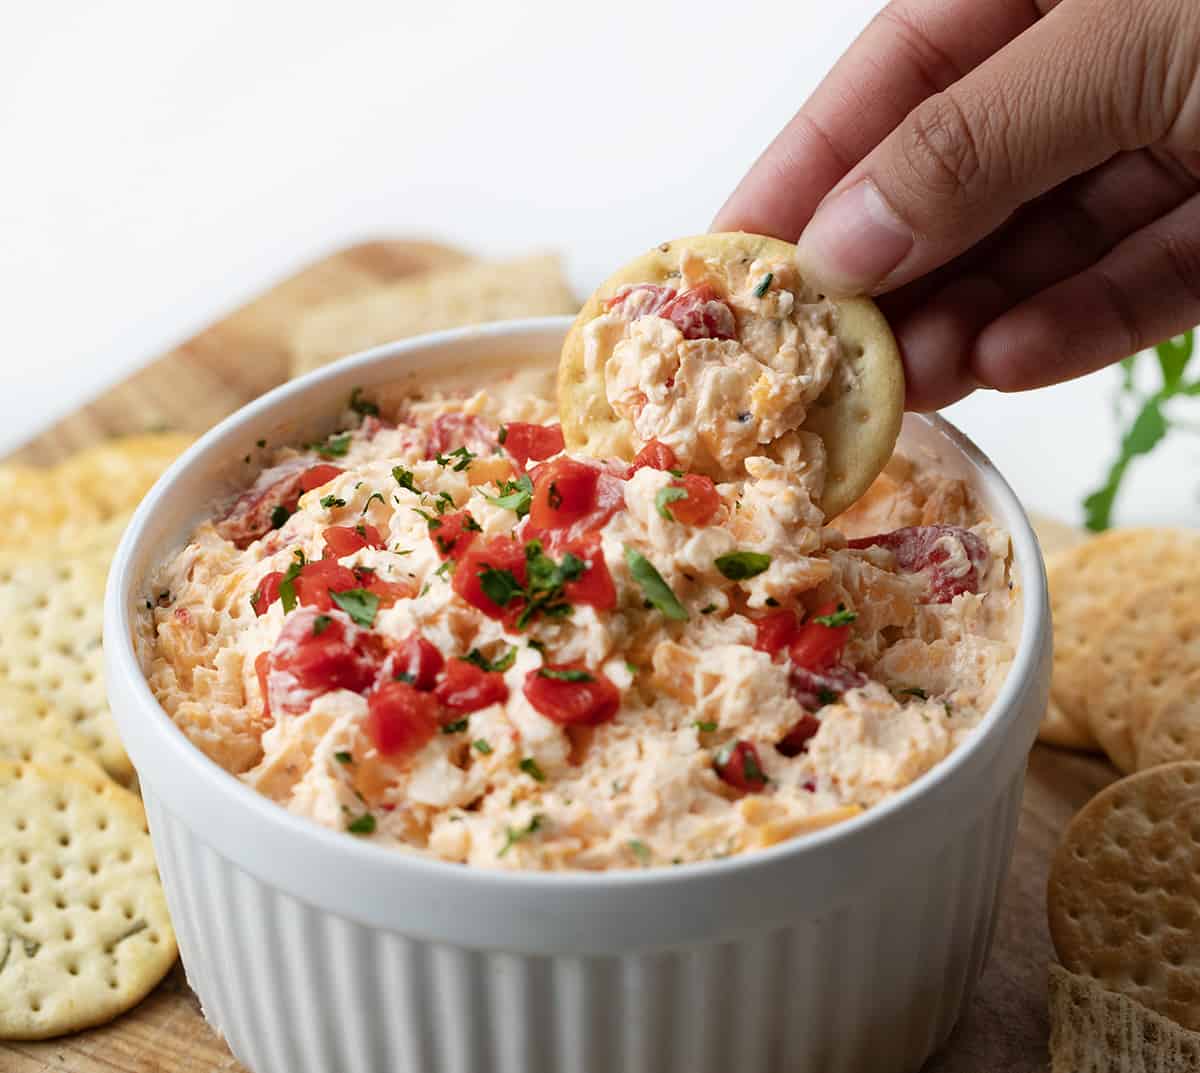 Hand scooping up Pimento Cheese with a cracker.